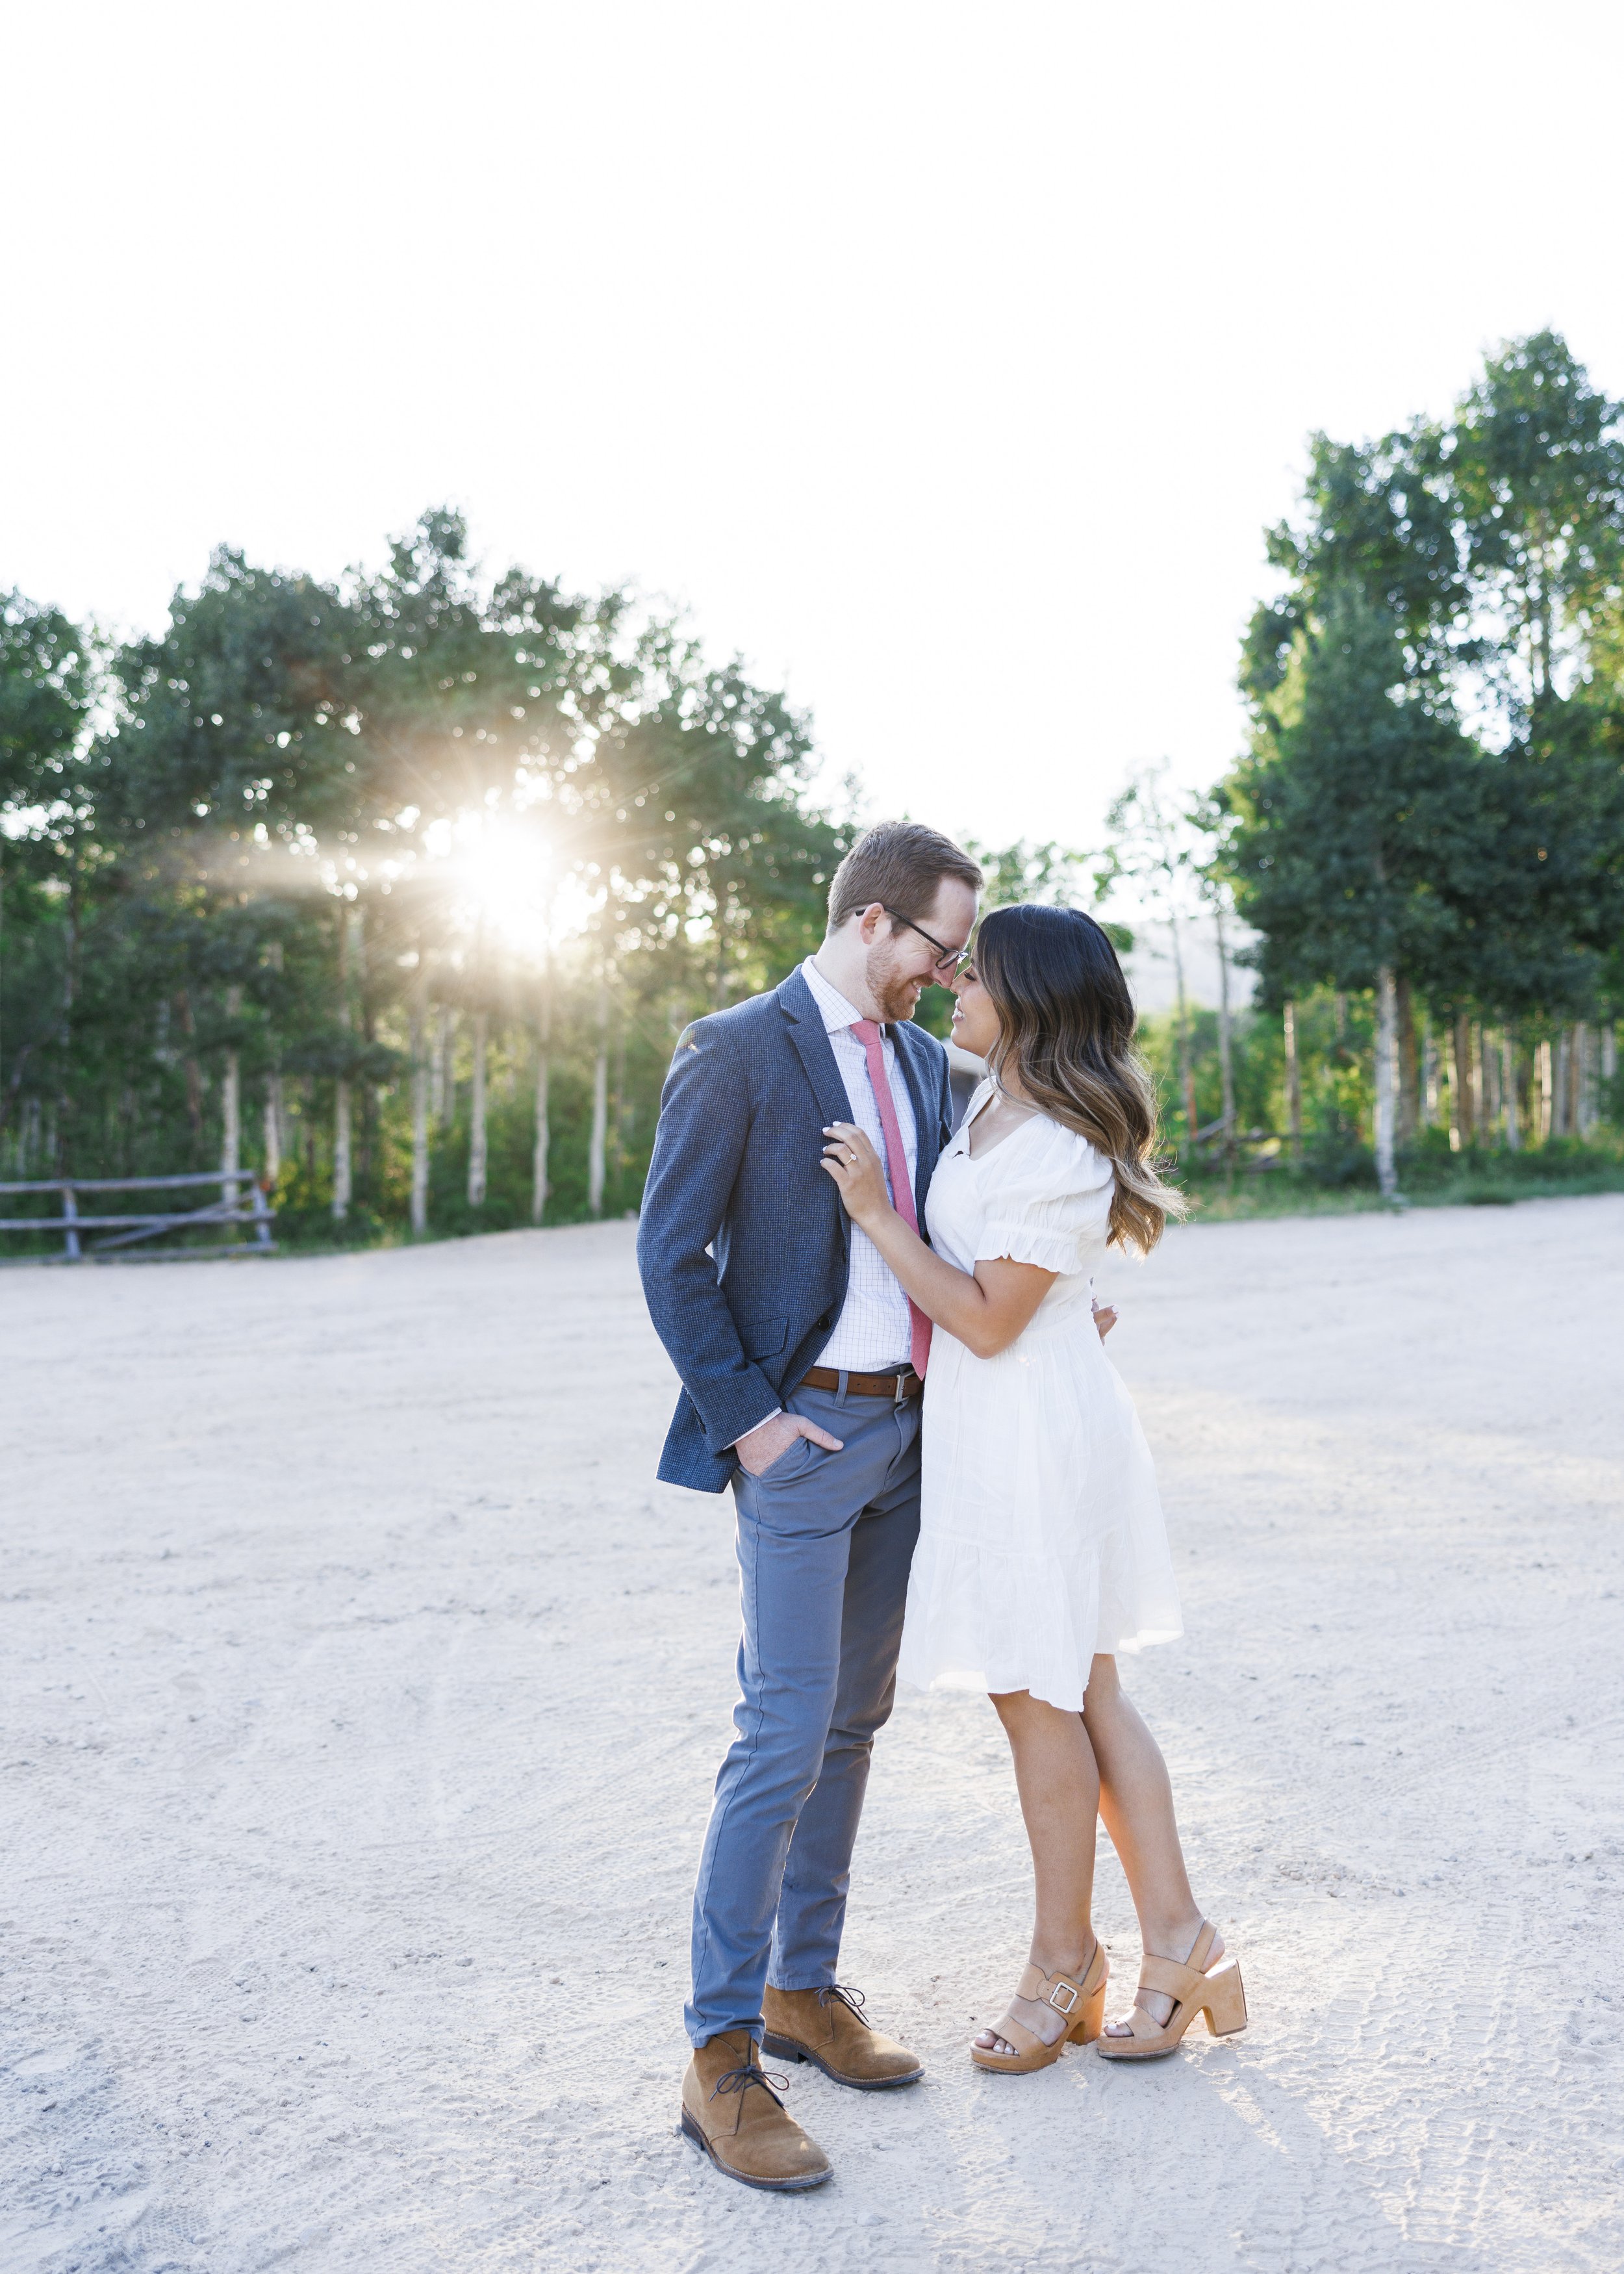  With the sun setting behind them an engaged couple kiss while wearing classy clothing by Savanna Richardson Photography. Pro Photographers #ParkCityEngagements #ParkCityPhotographers #SavannaRichardsonPhotography #SavannaRichardsonEngagements 